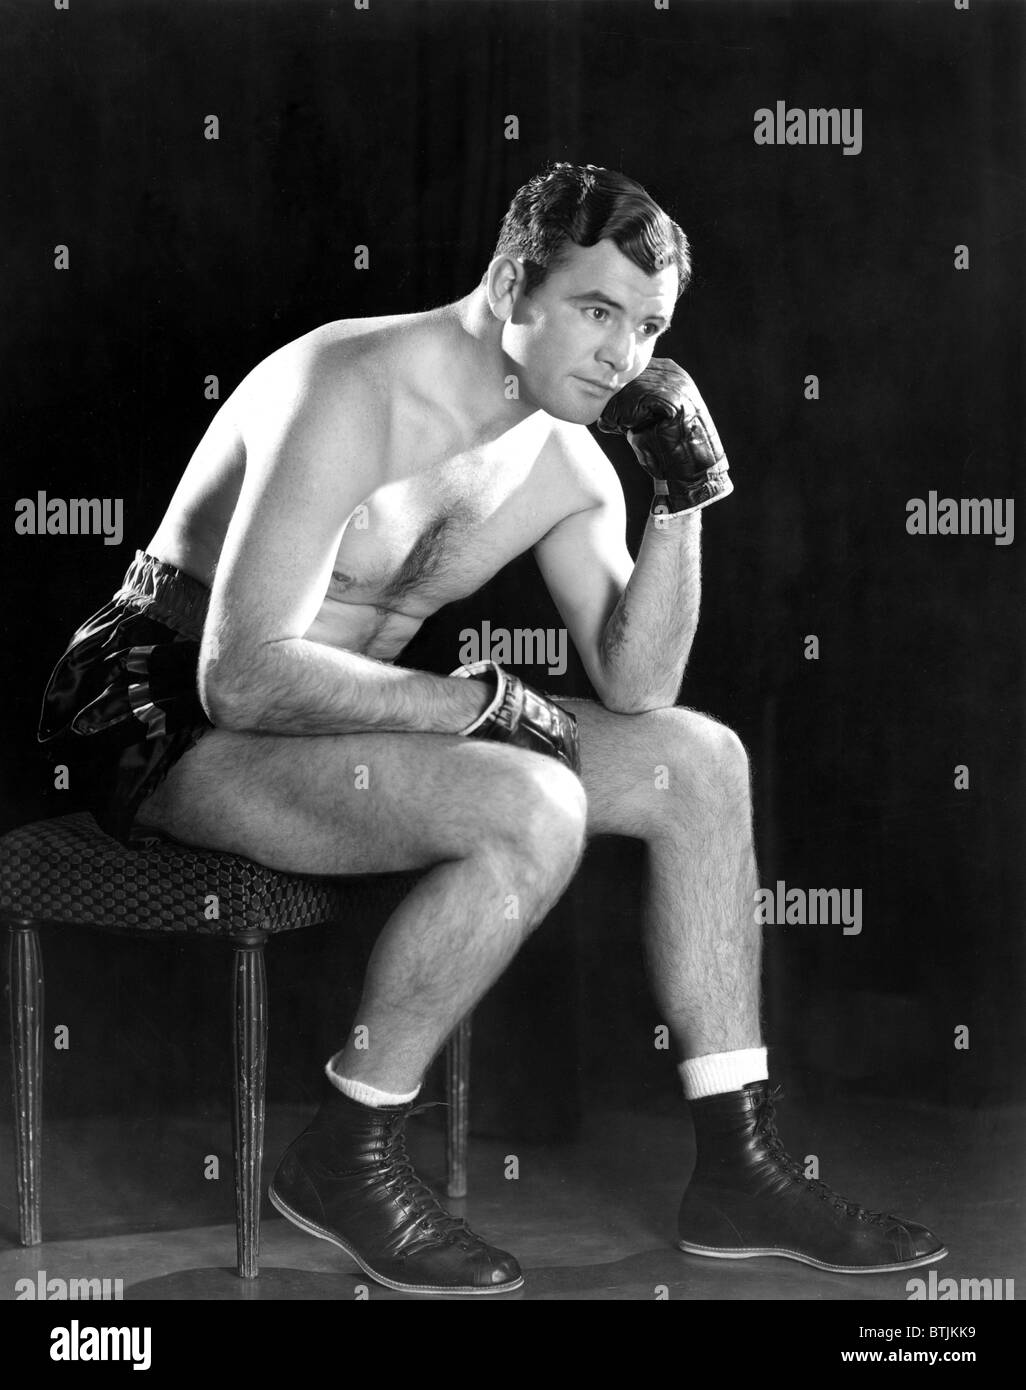 James Braddock in promotional photo for NBC-Blue Network radio show  in which he is featured, November 30, 1936. Stock Photo